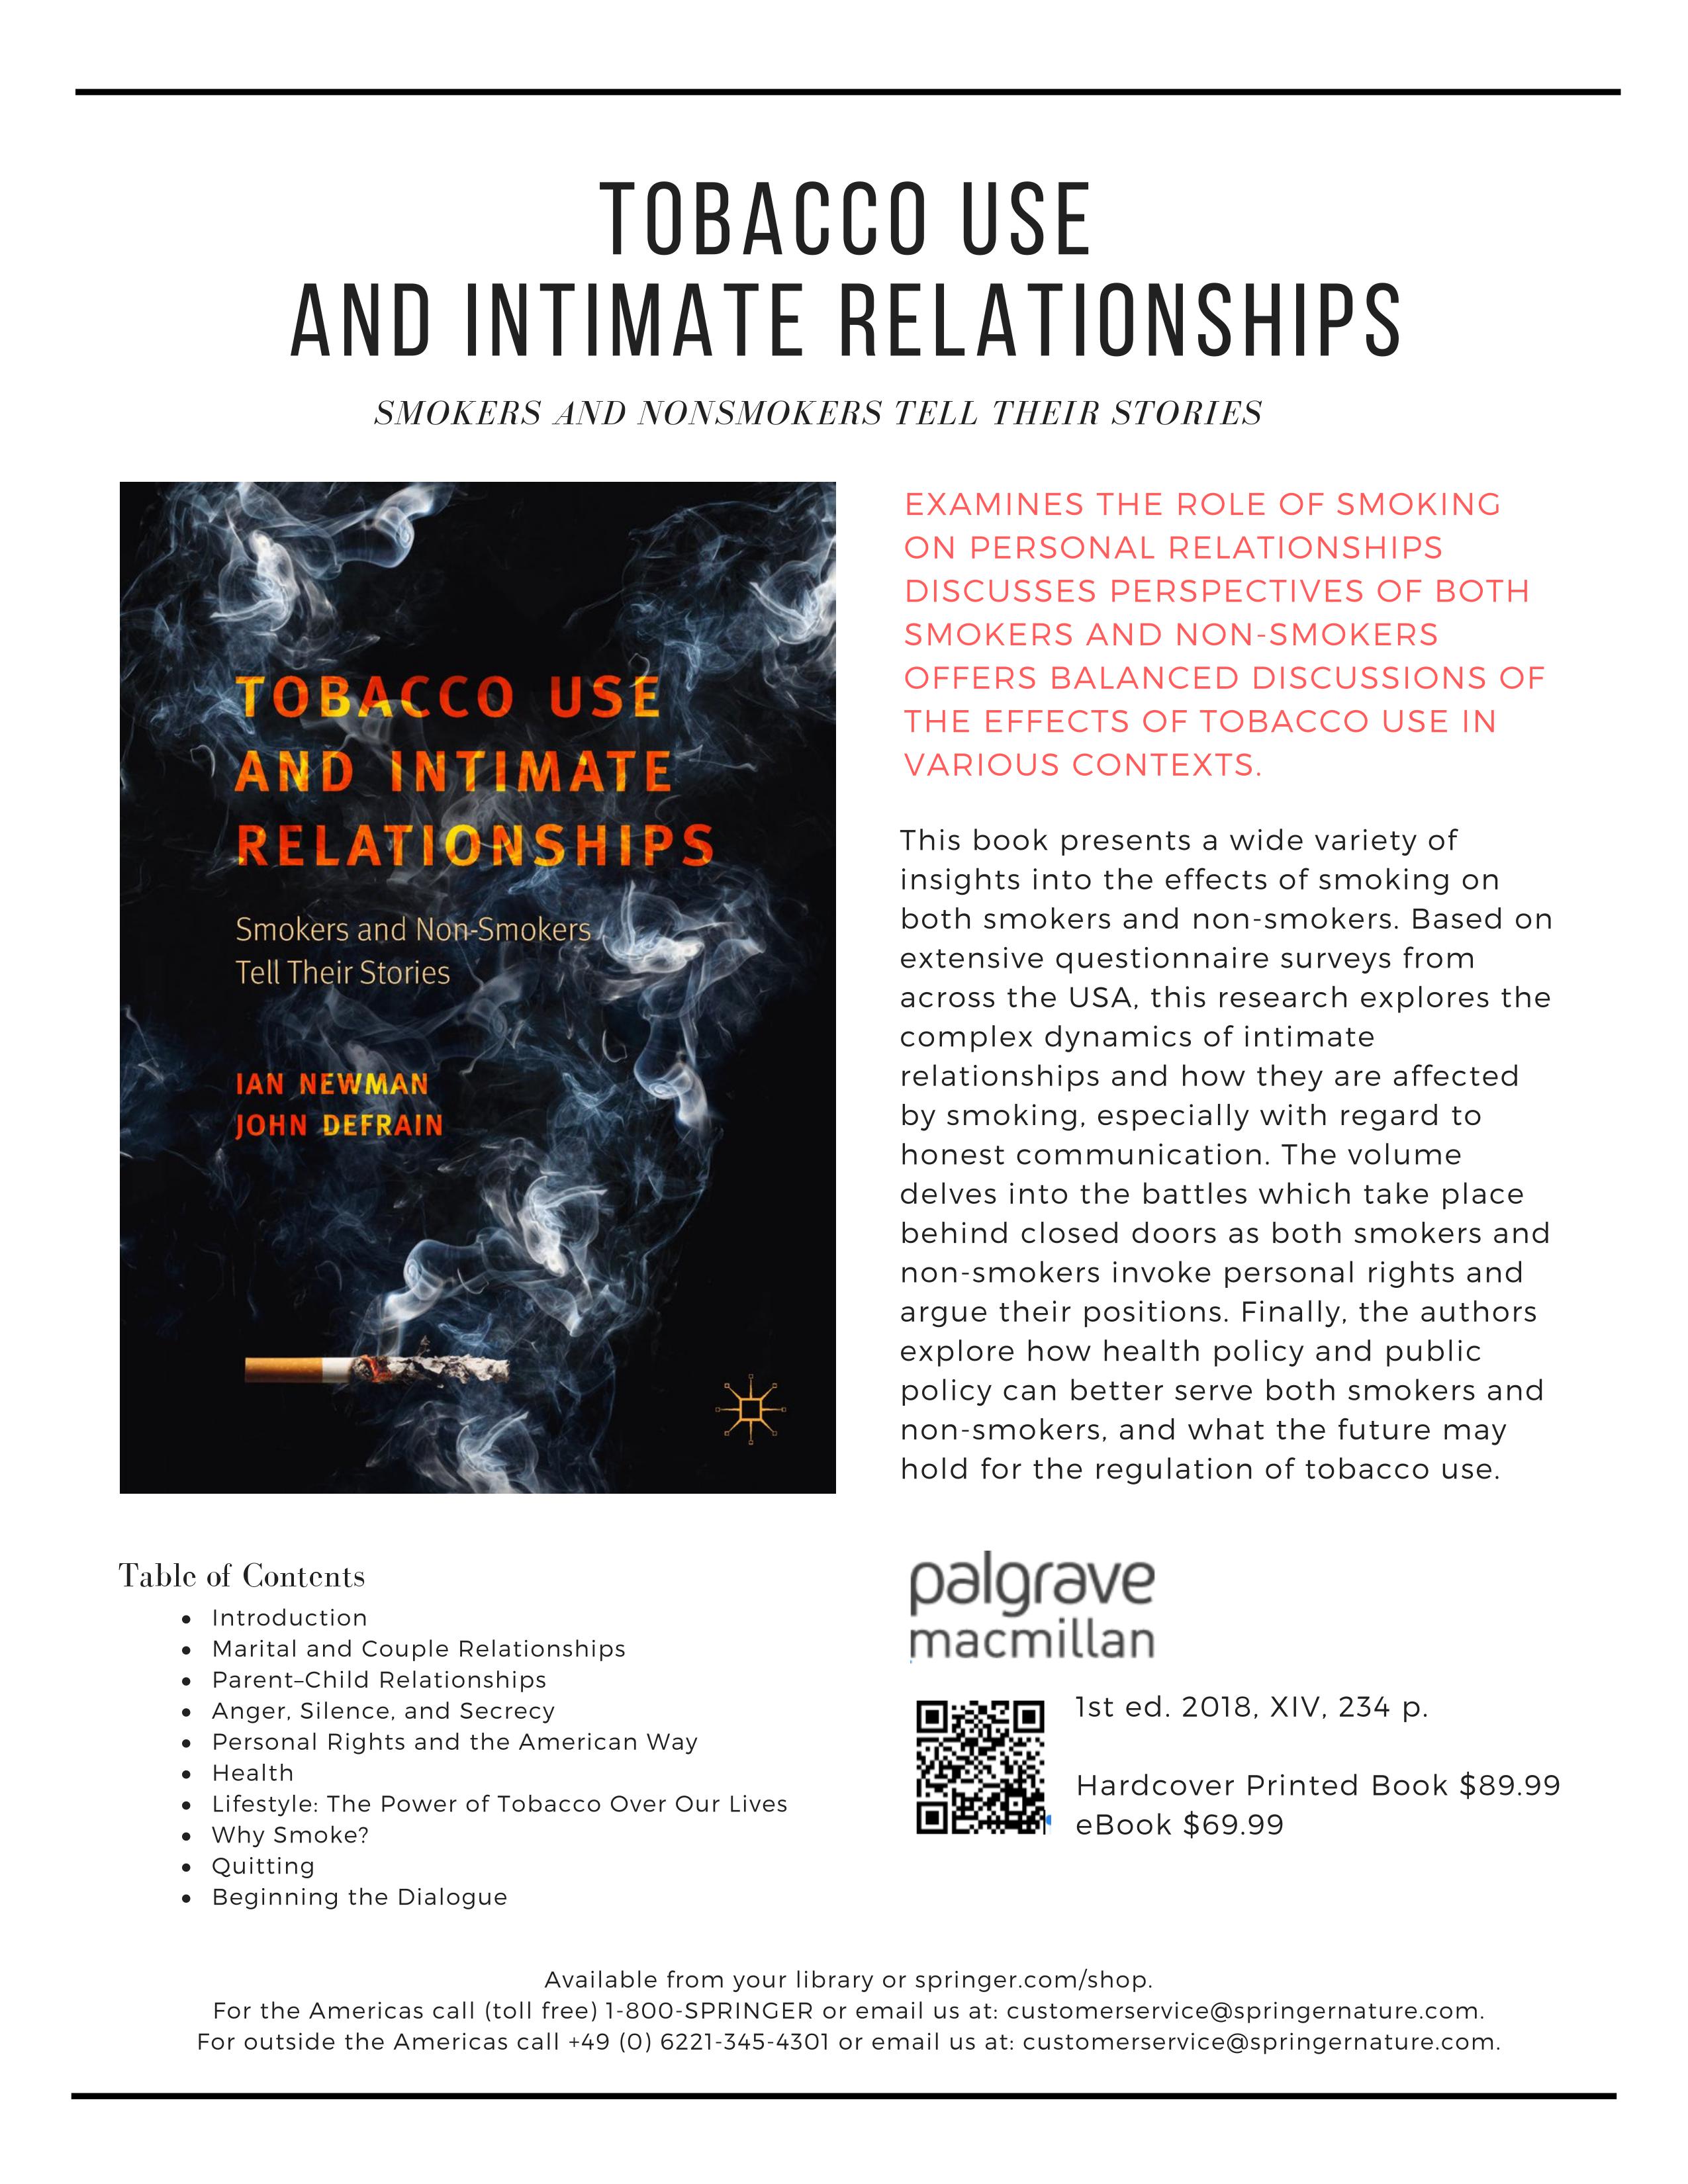 TOBACCO USE AND INTIMATE RELATIONSHIPS